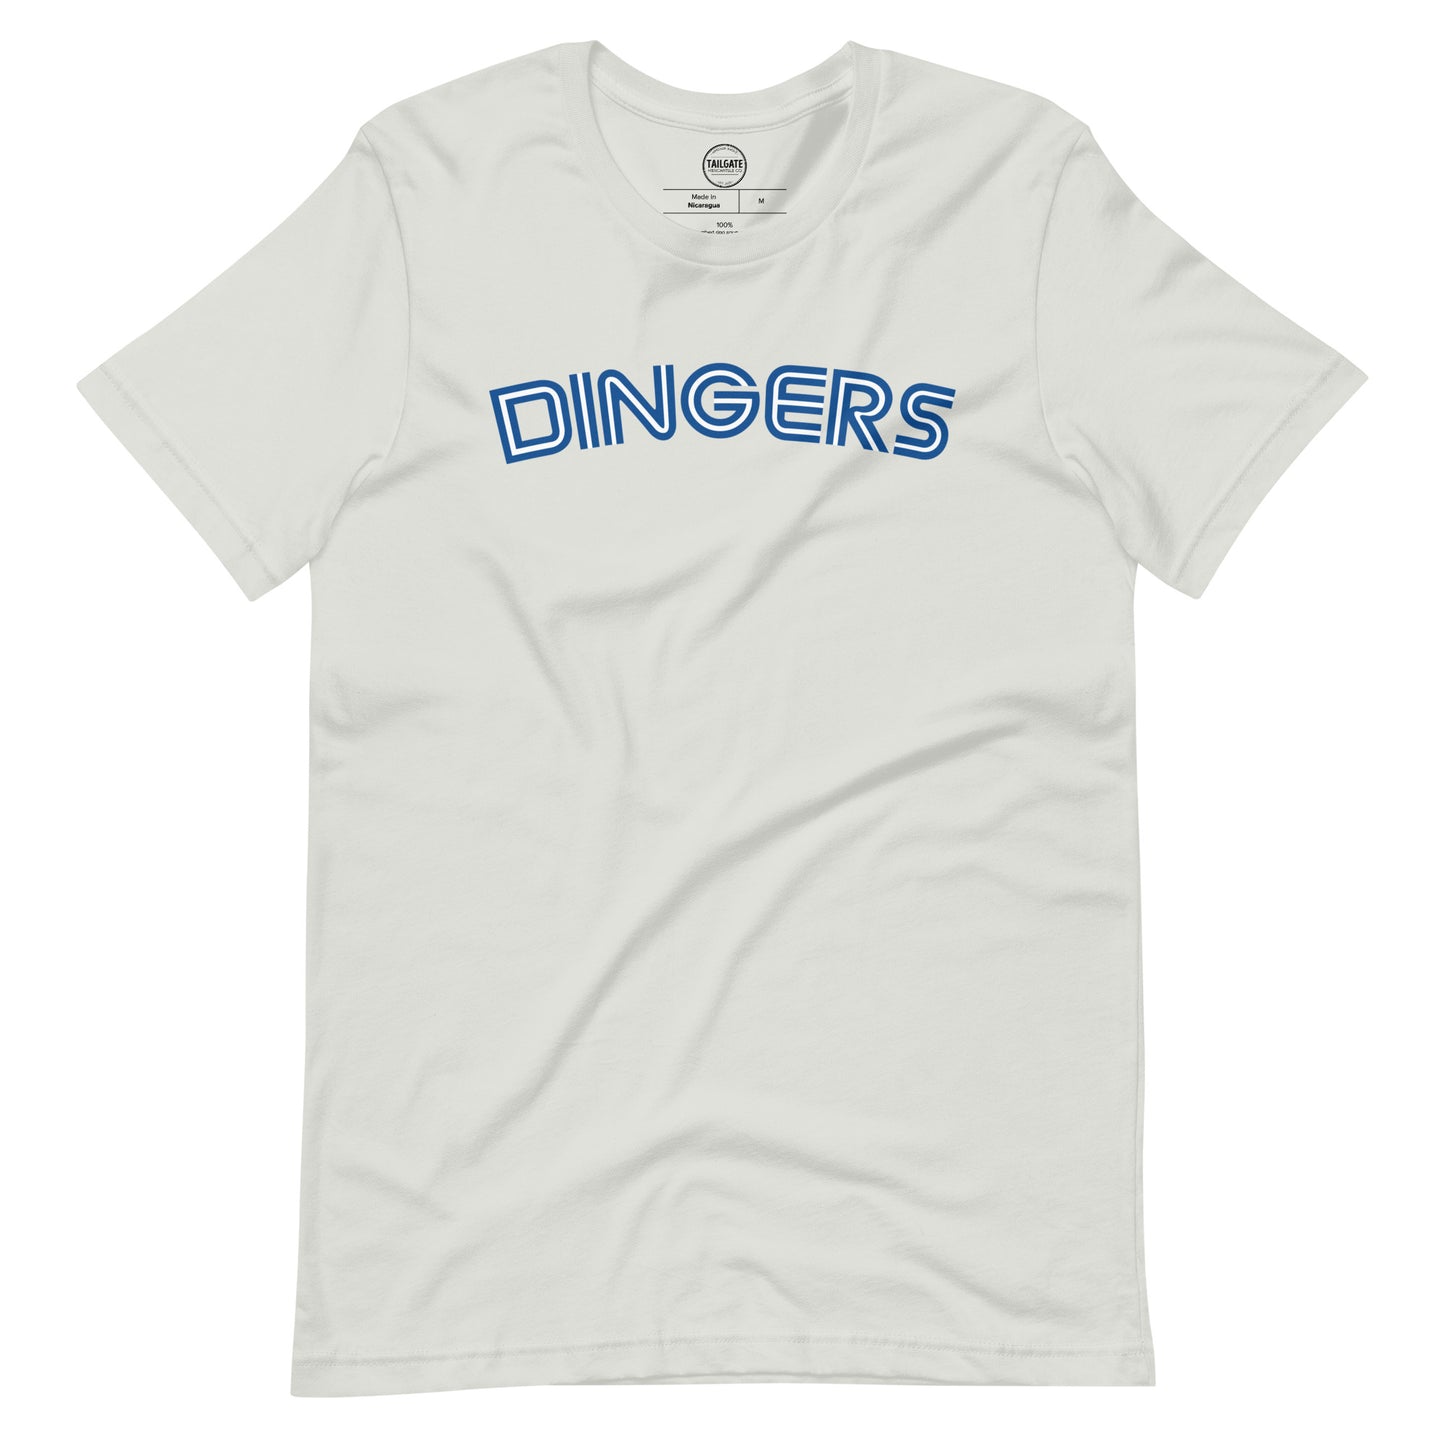 Image of silver t-shirt with design of "DINGERS" in Toronto Blue Jays retro blue style font located on centre chest. This design is exclusive to Tailgate Mercantile and available only online.